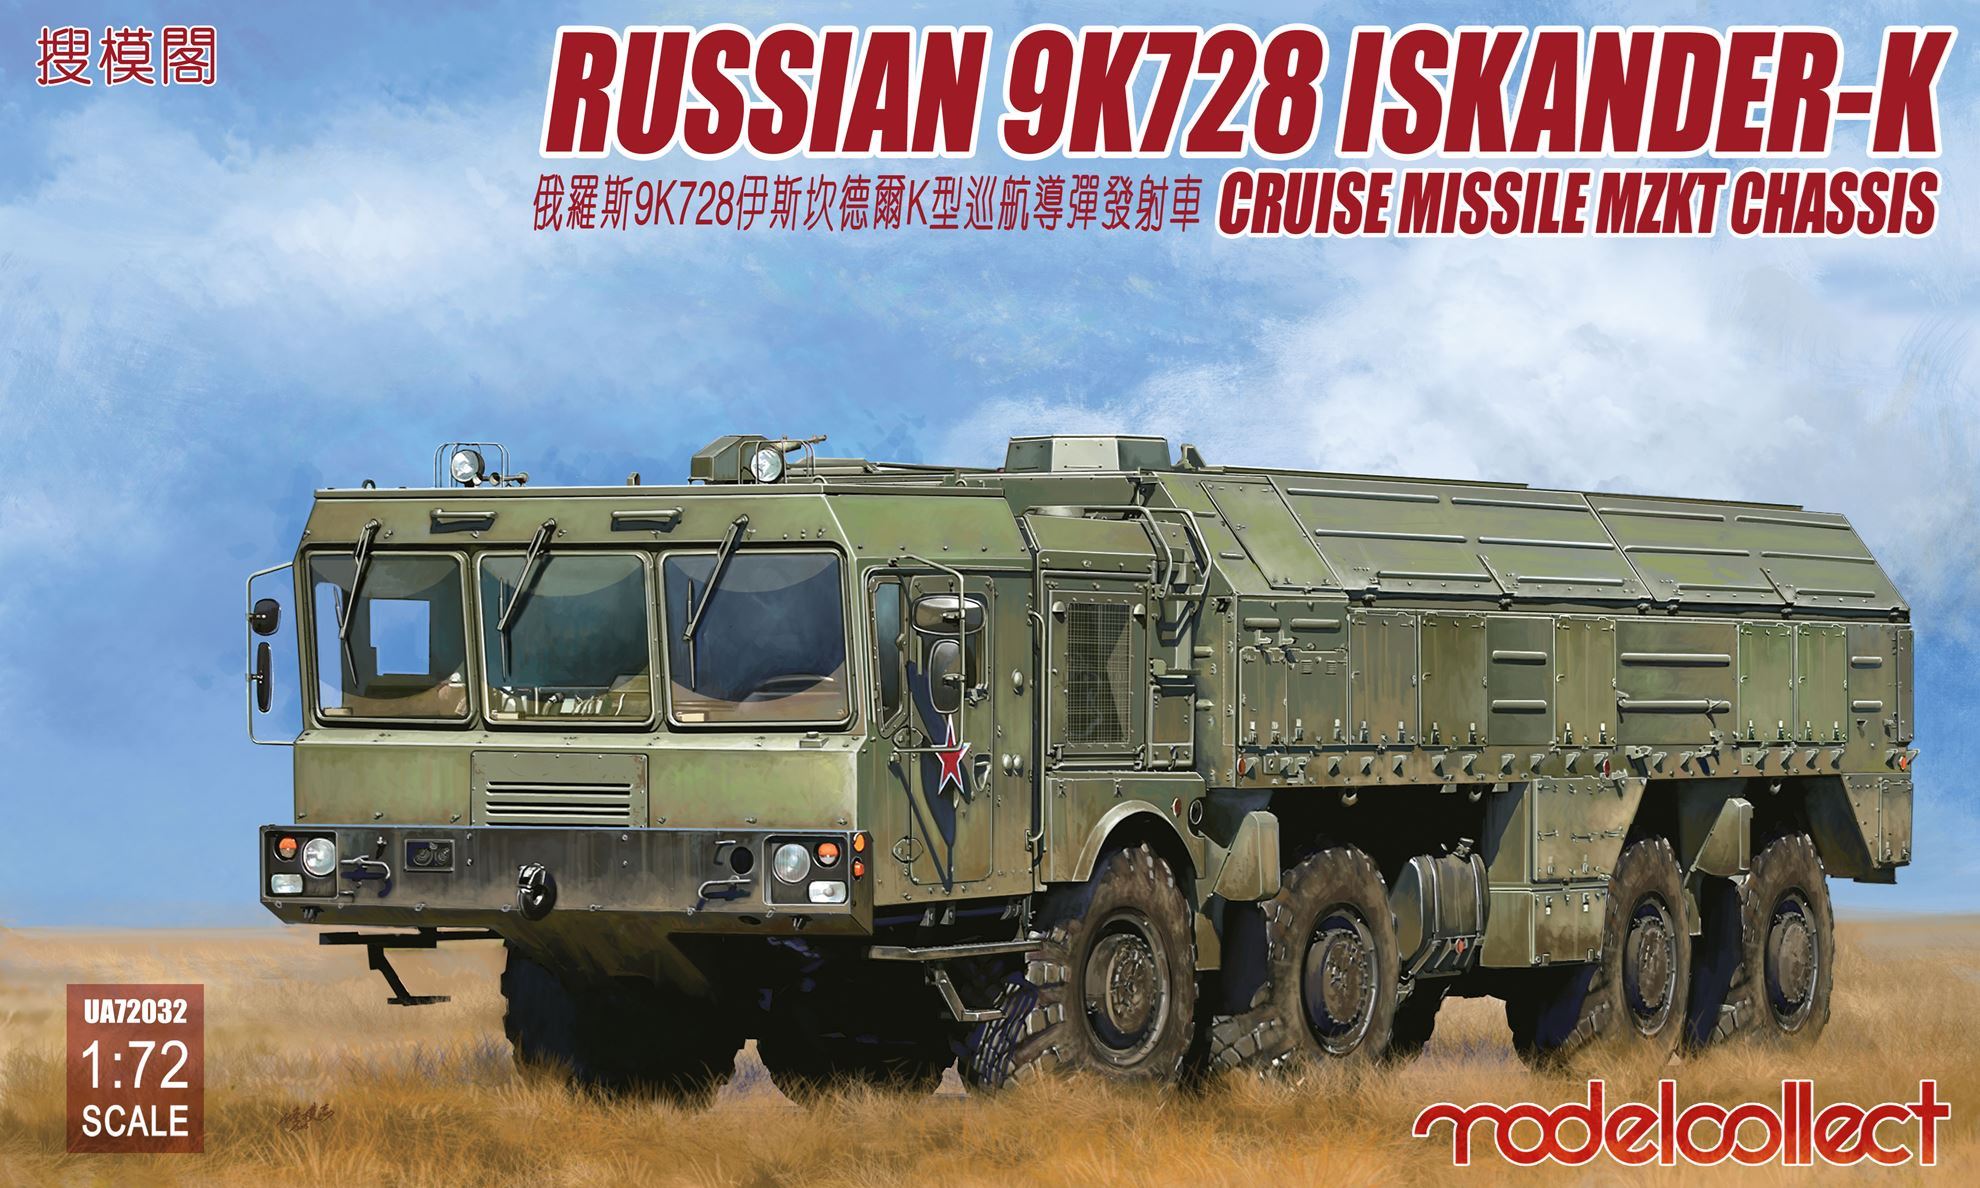 Russian 9K728 Iskander-K cruise missile luncher MZKT chassis